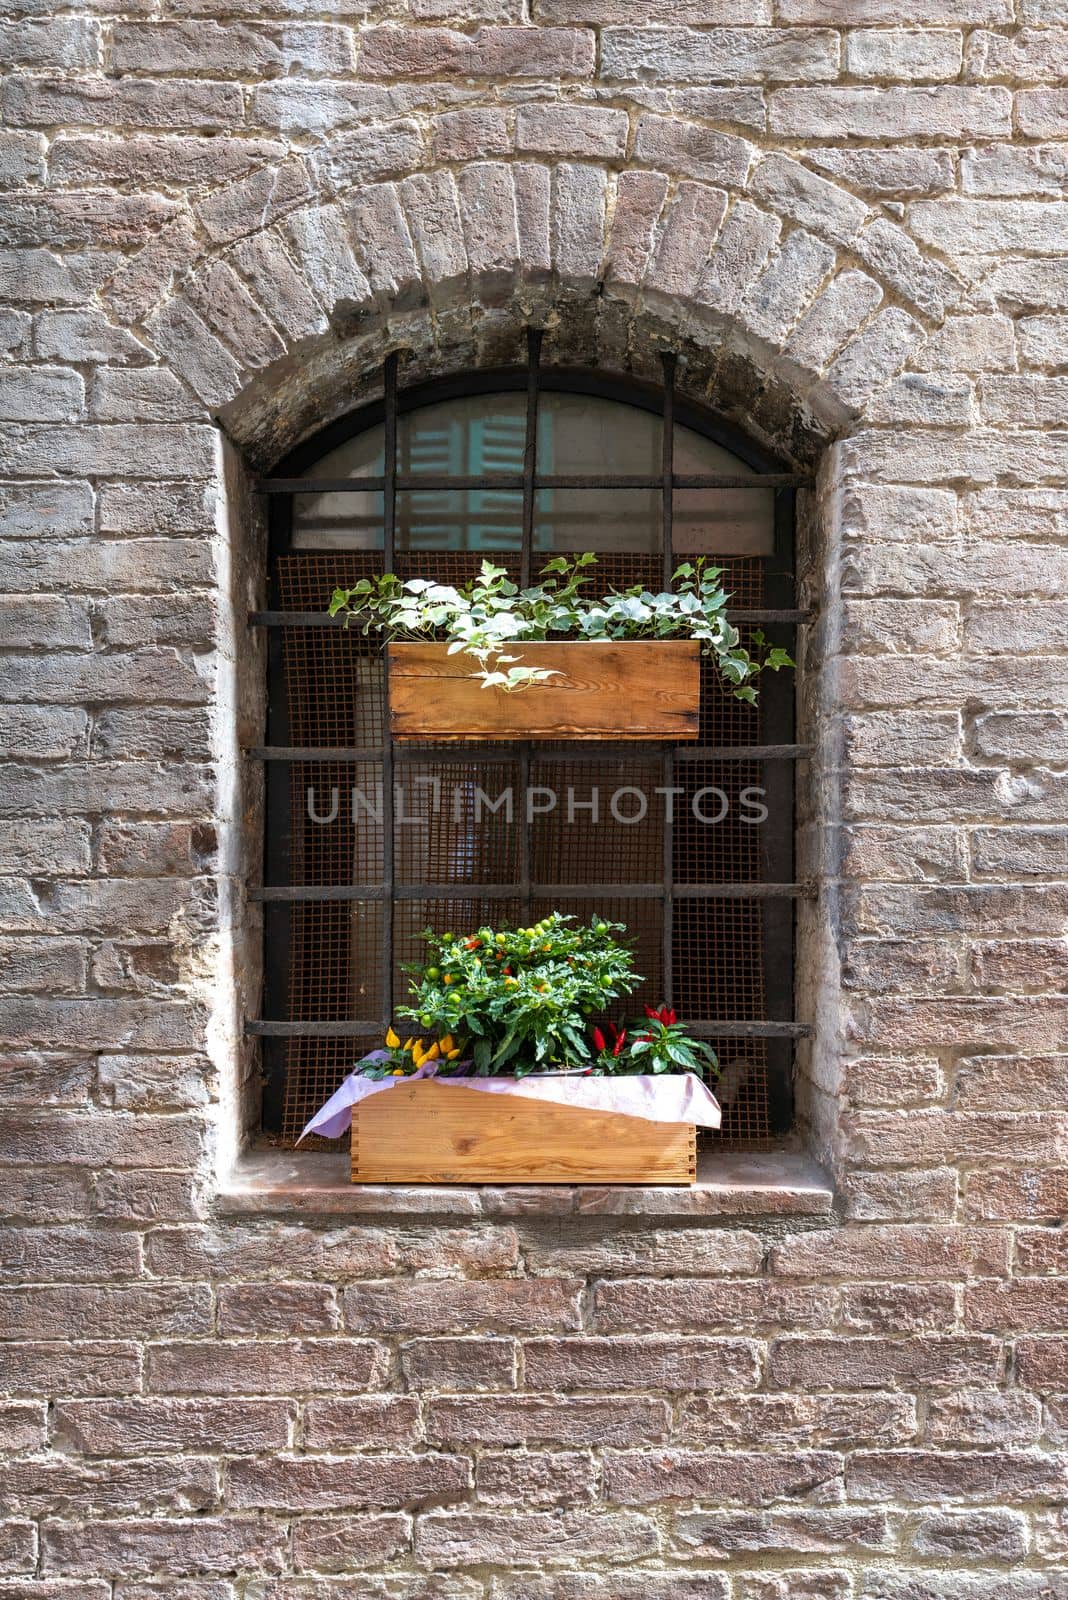 A window in an old brick wall was embellished with beautiful little blooming flowers in wooden boxes.